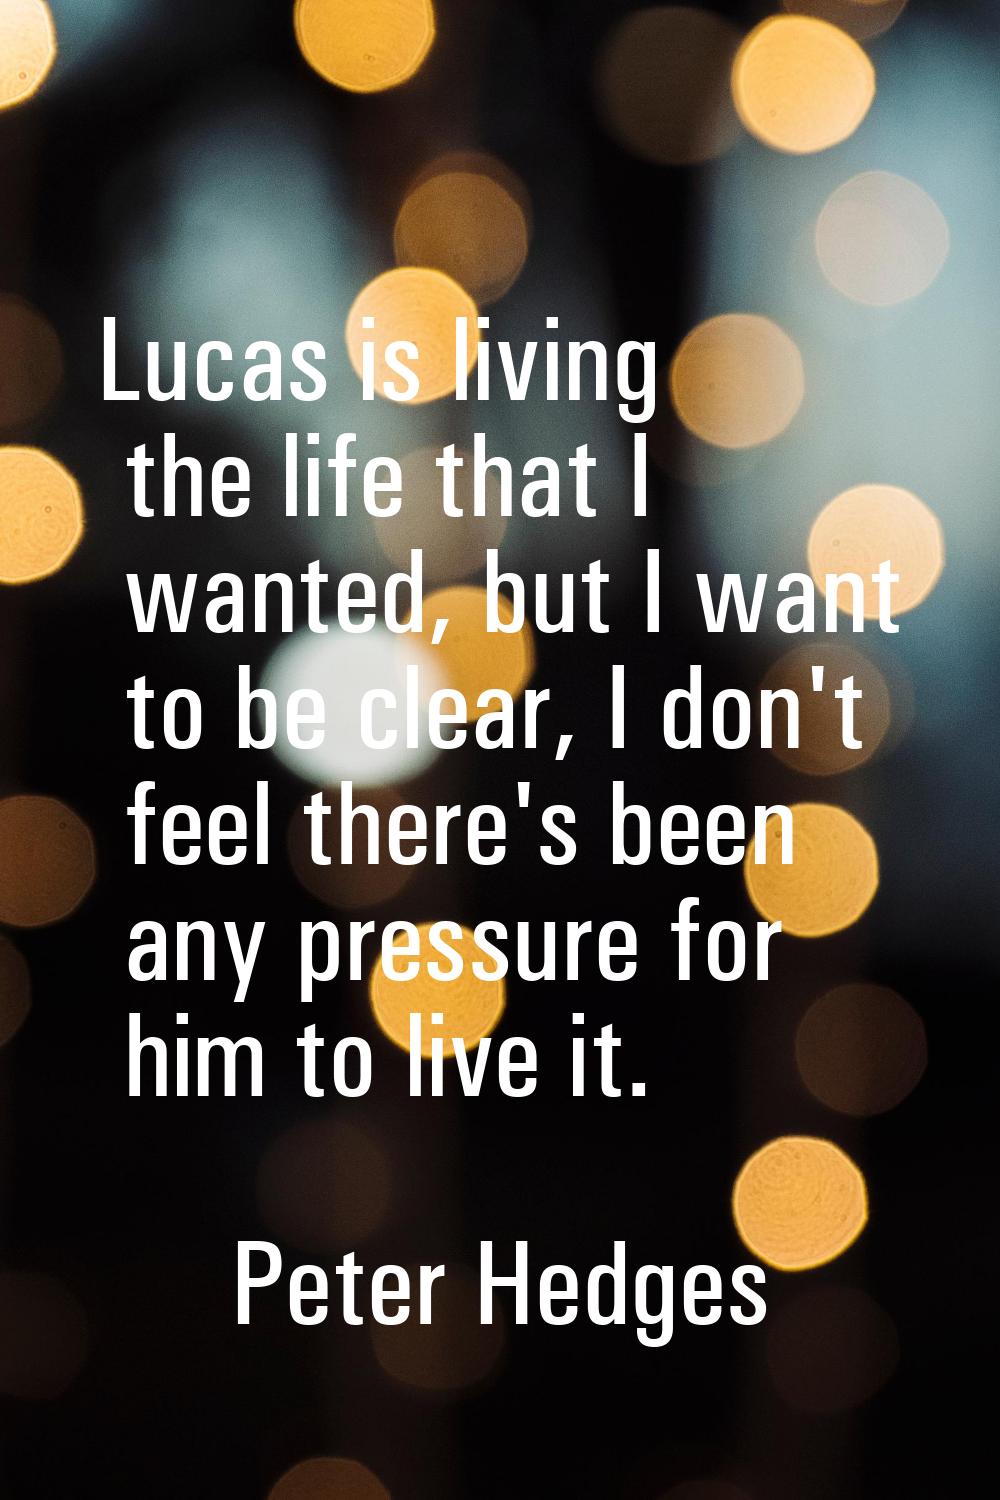 Lucas is living the life that I wanted, but I want to be clear, I don't feel there's been any press